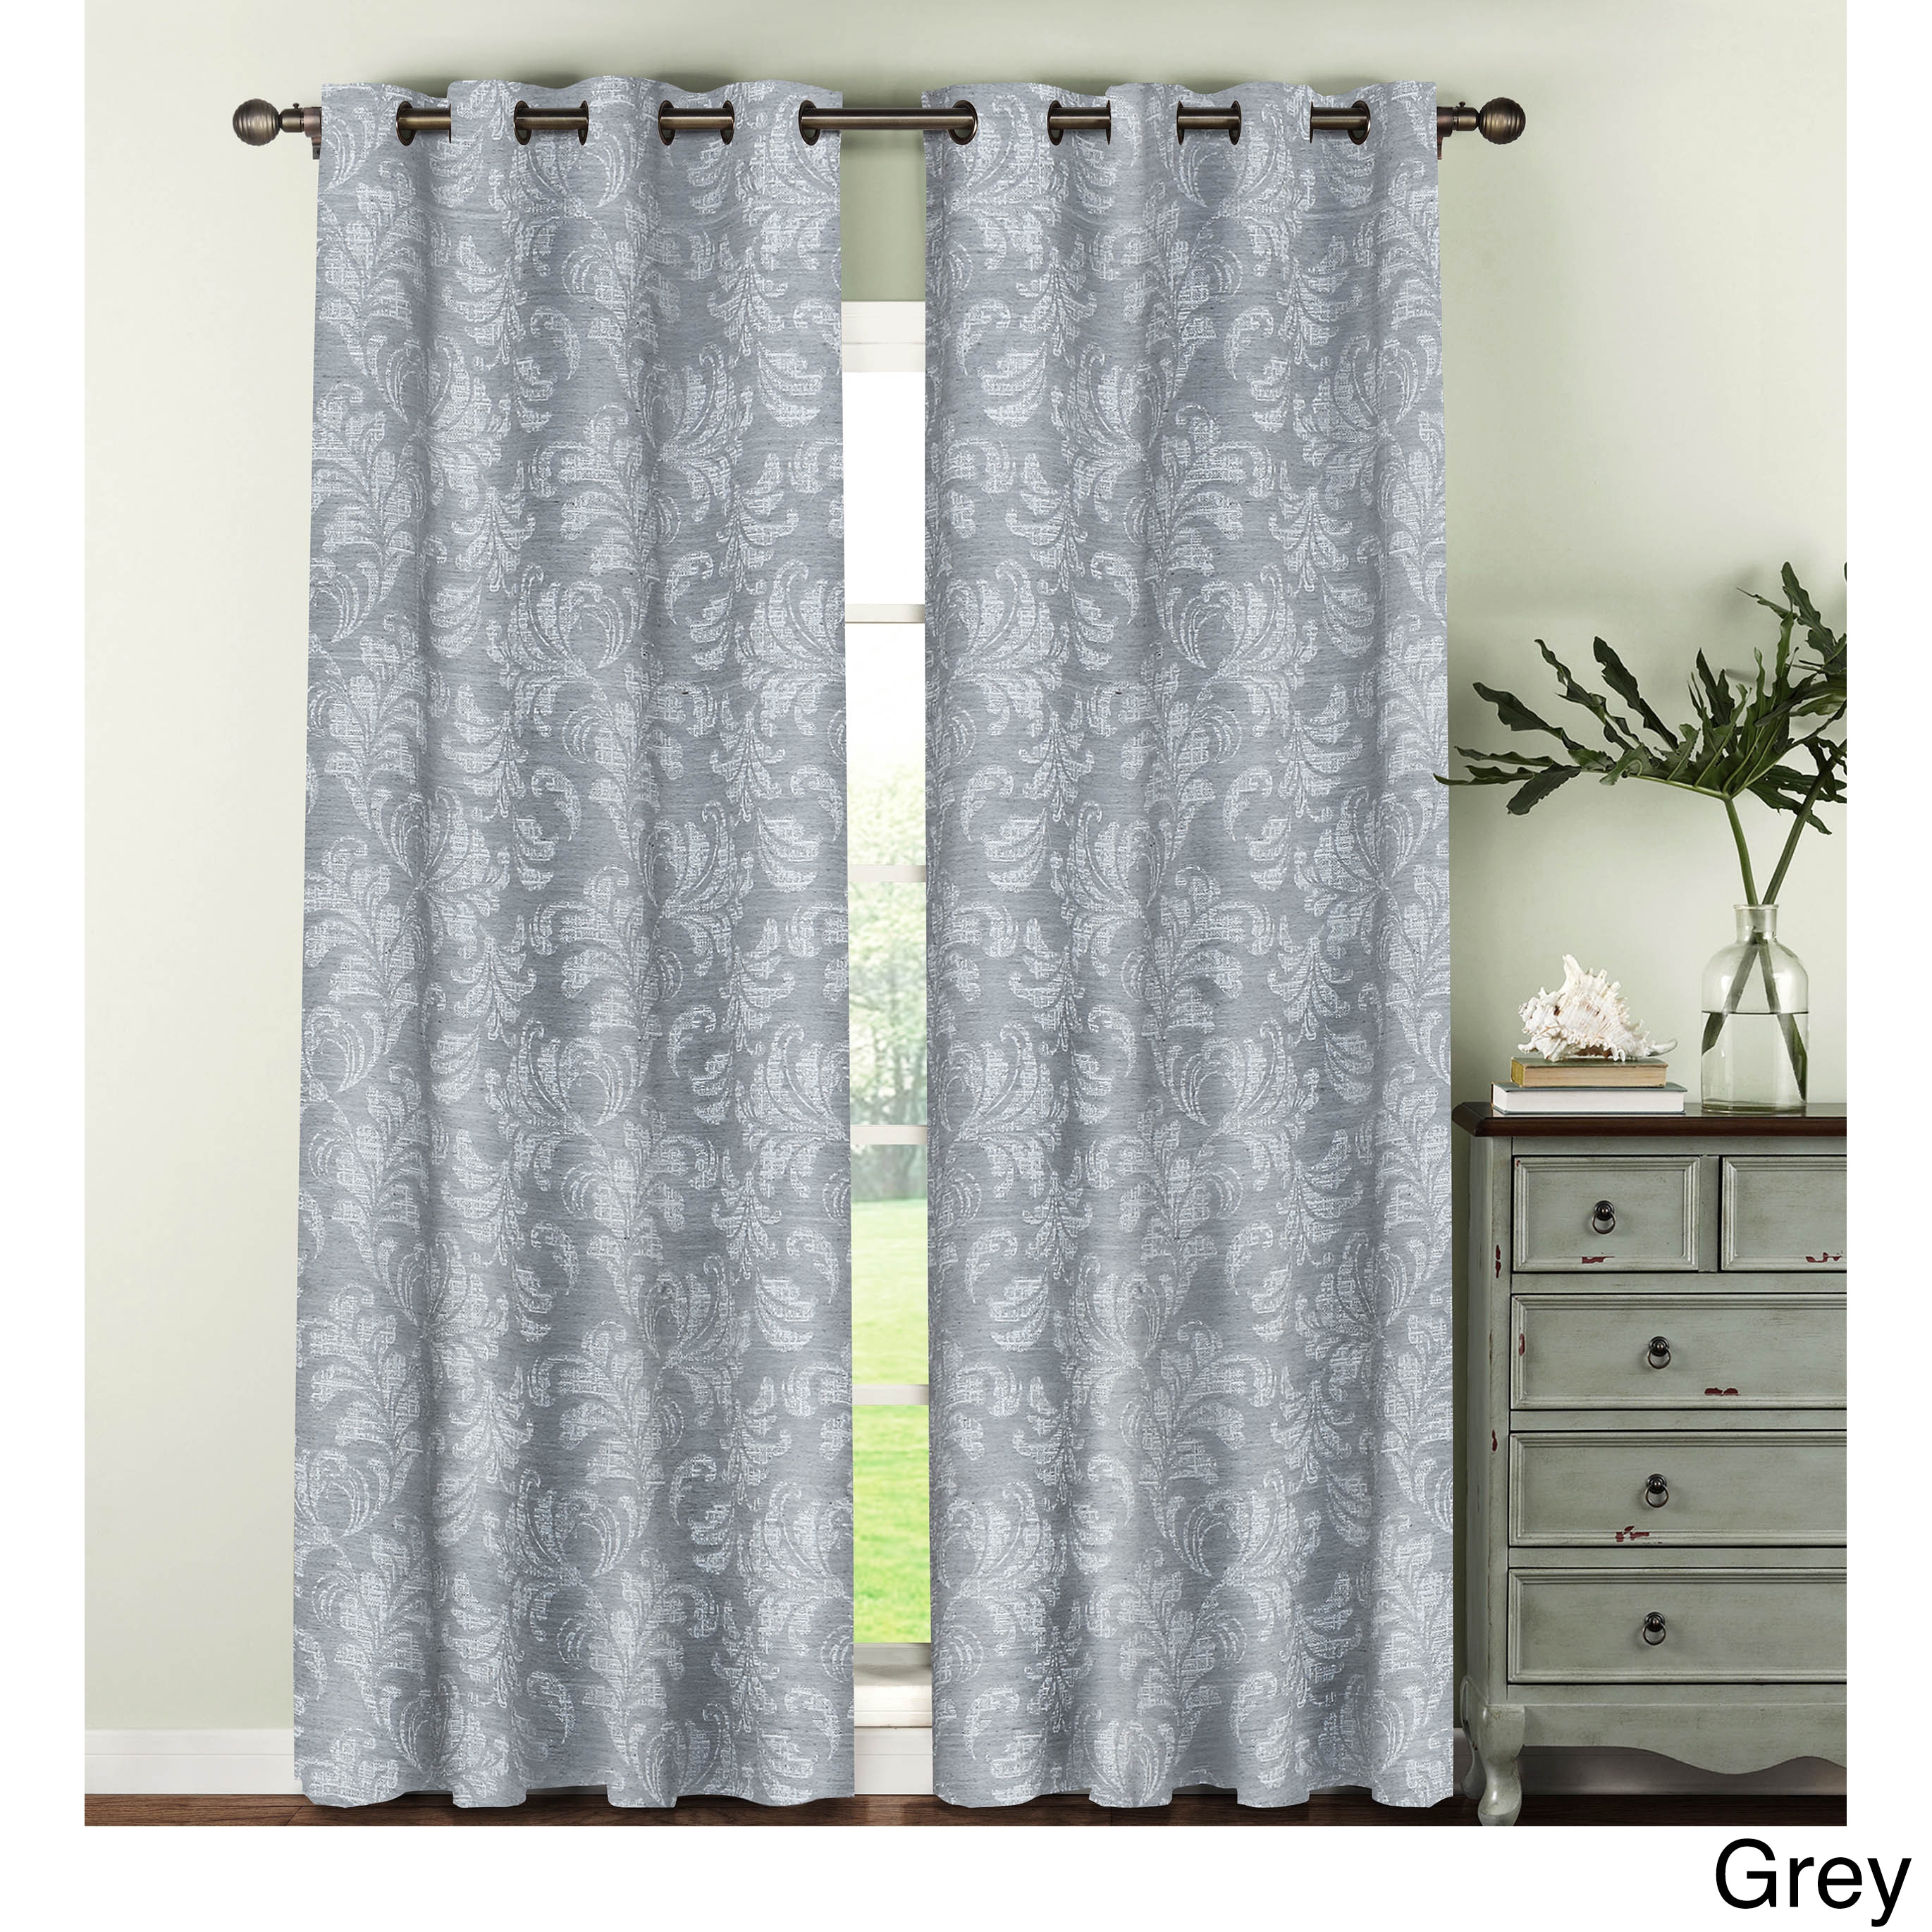 Linens and Lace Jacquard Curtains Unisex Pattern 